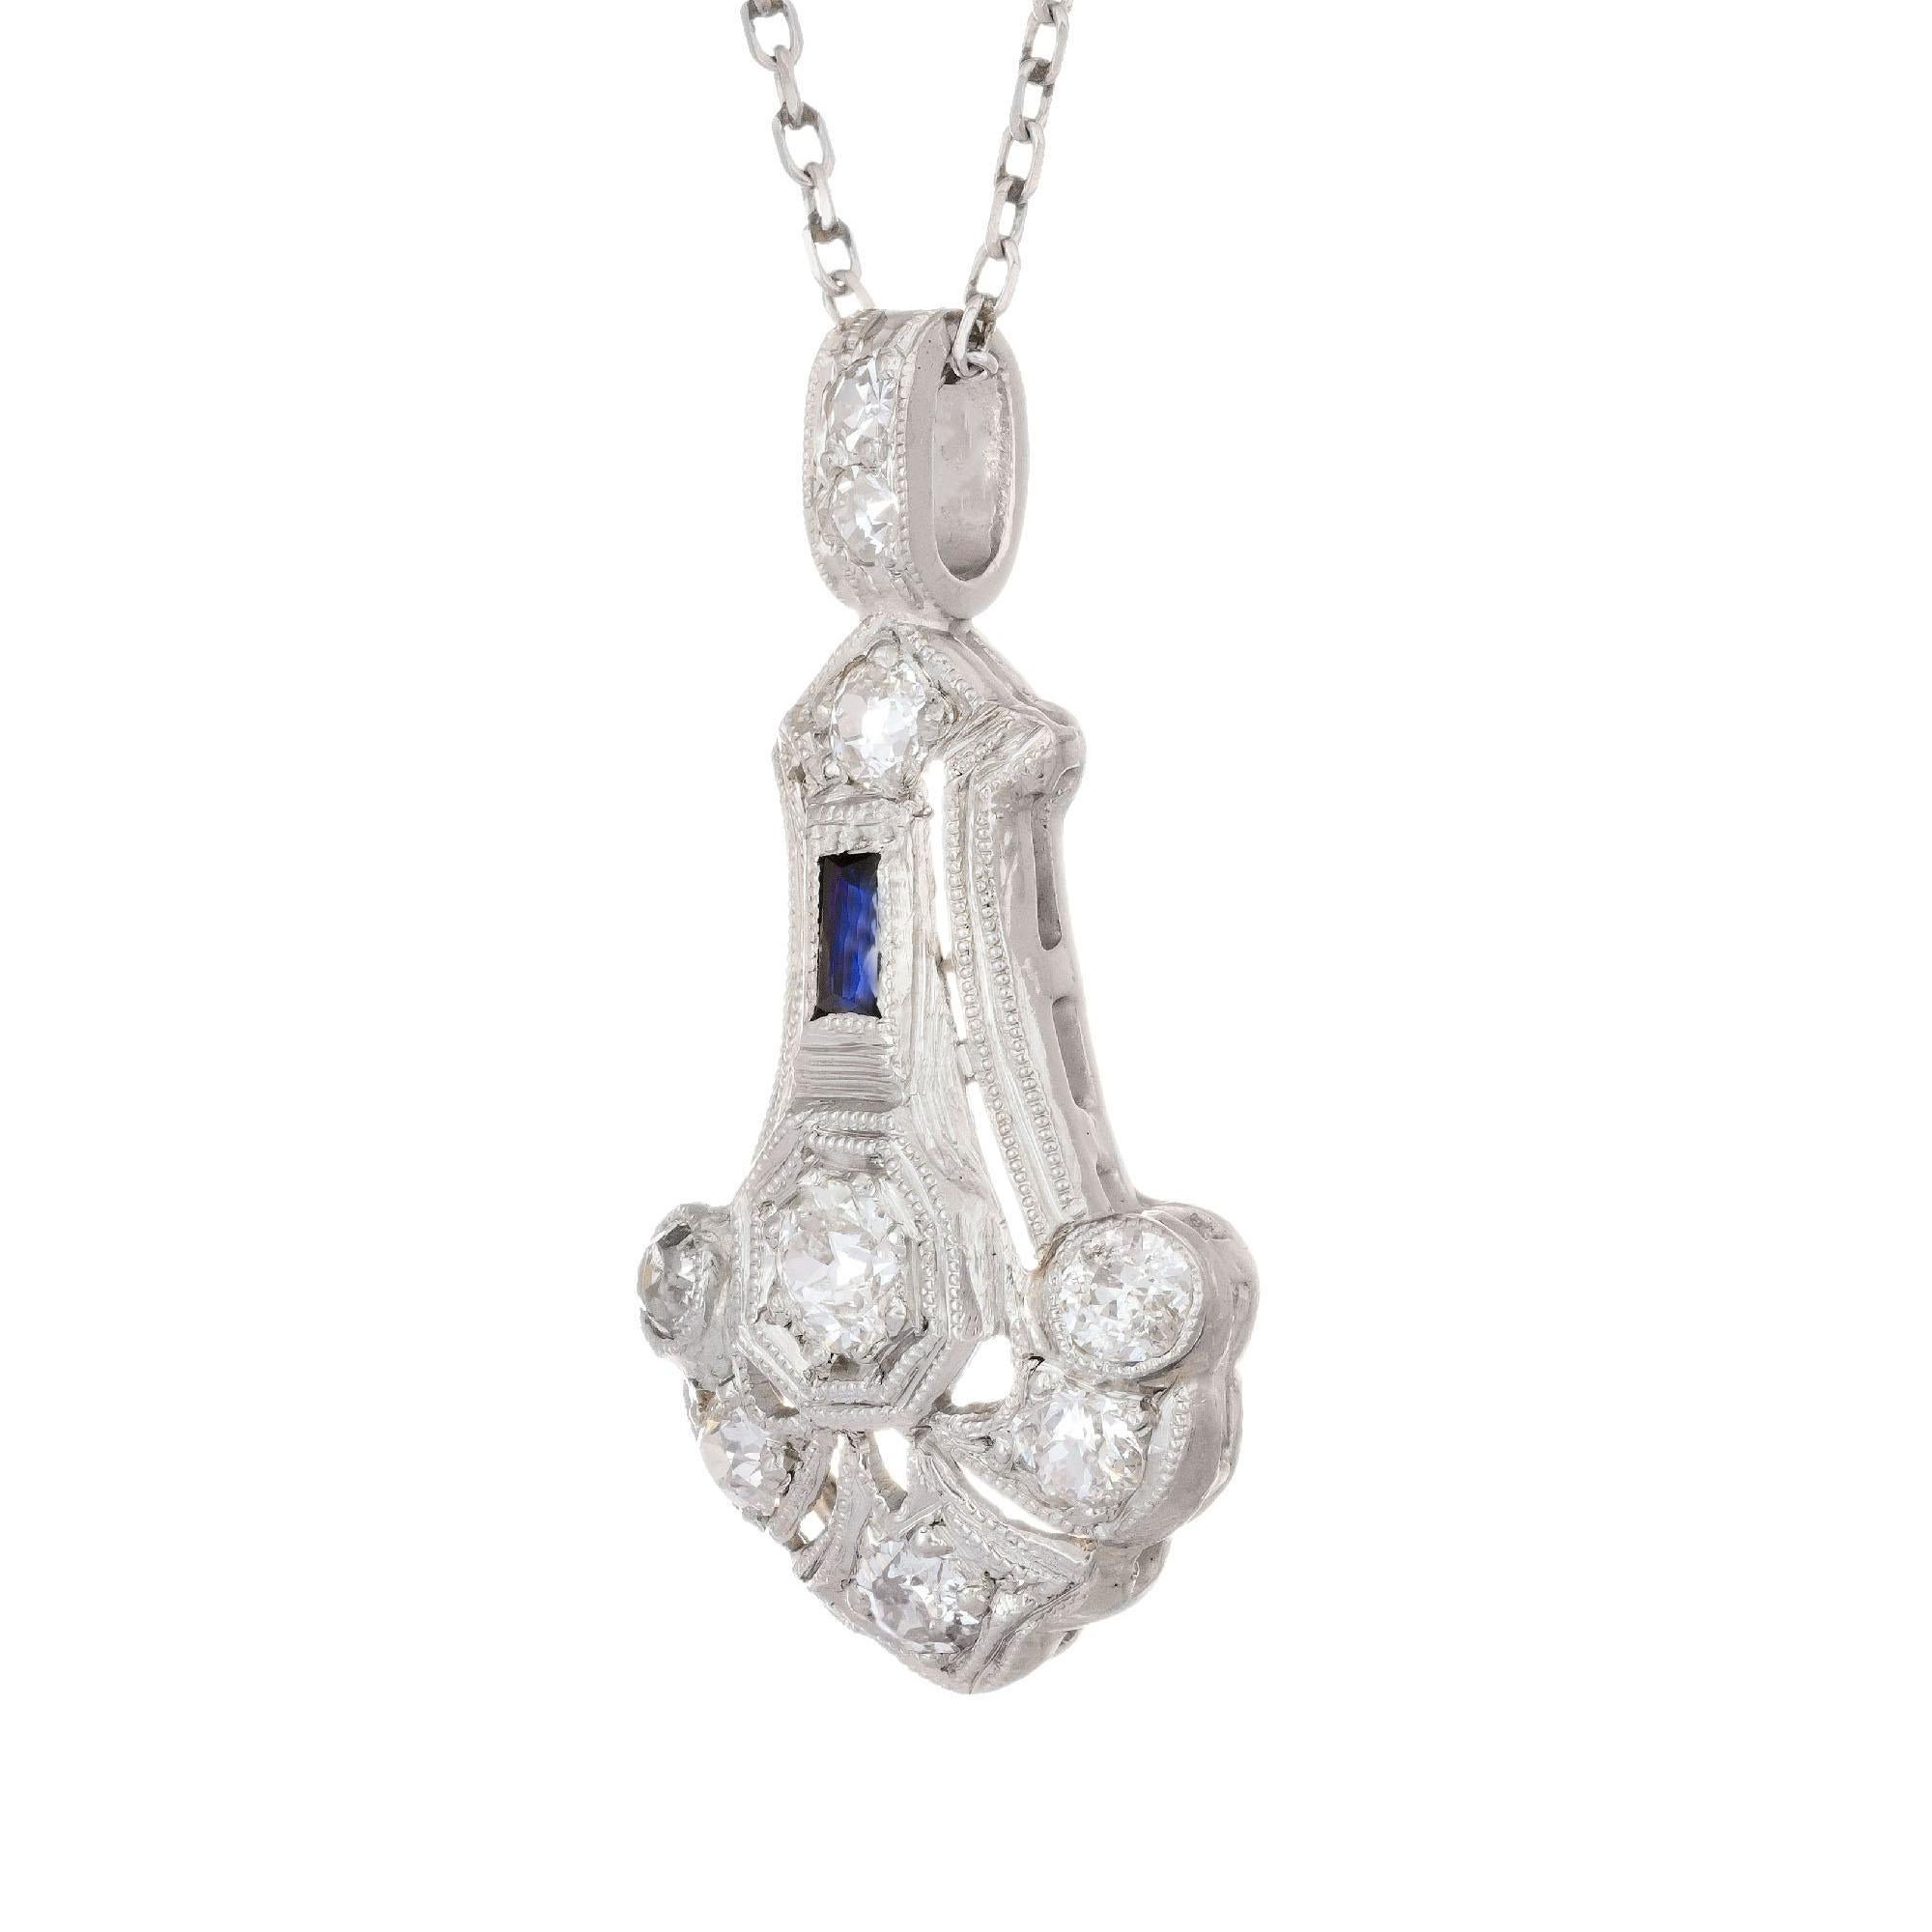 Diamond and sapphire necklace. 9 old min cut diamonds set in platinum with a center French cut sapphire on a 16 inch platinum chain. 

9 old mine diamonds approx total weight .45 cts I-J, SI3
1 French cut sapphire .03cts
16 inch chain 
Length: